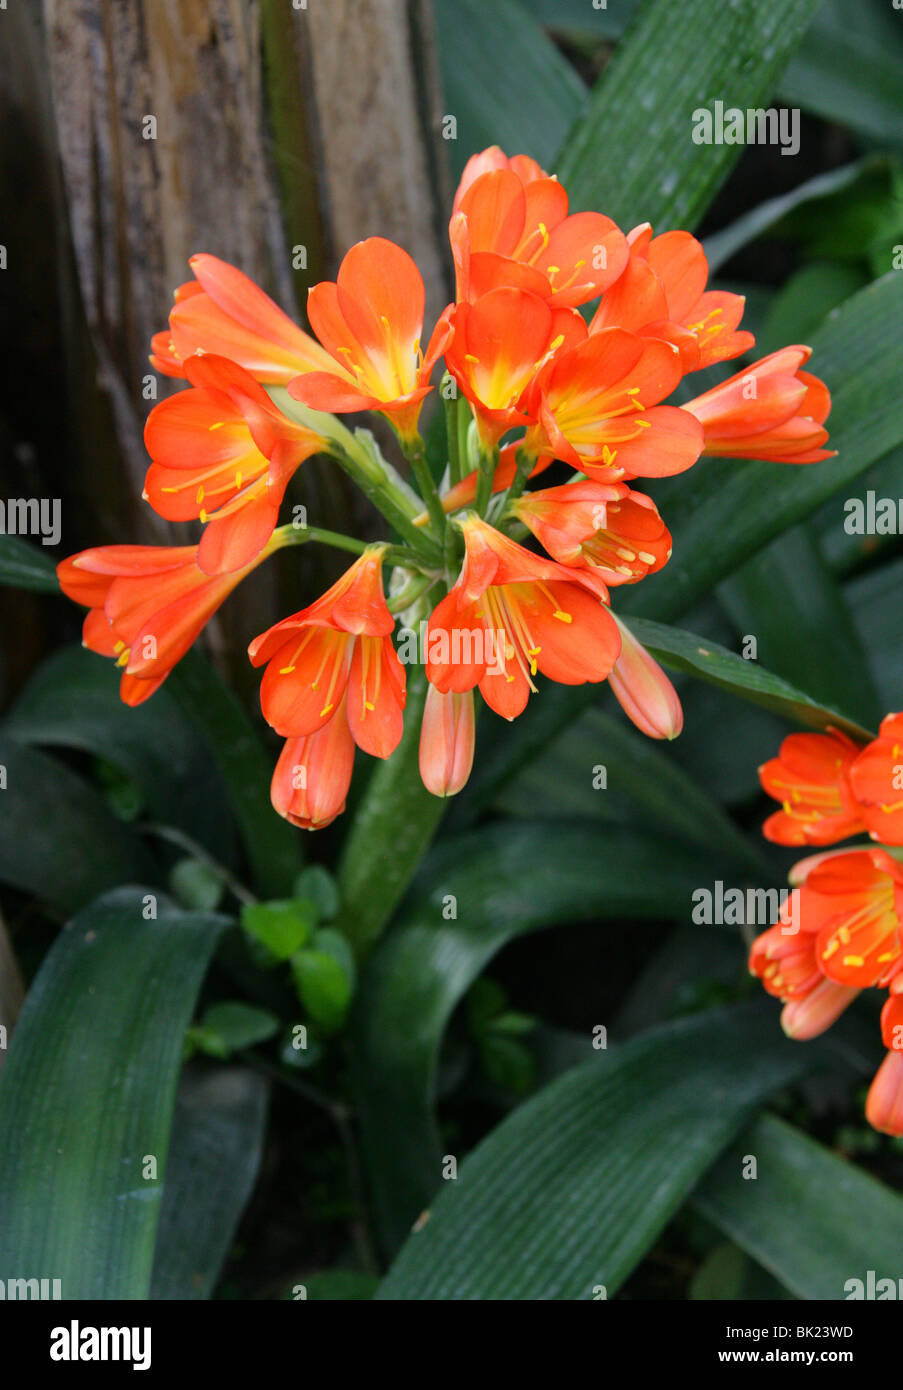 Kaffir Lily, Clivia miniata, Amaryllidaceae, South Africa. Aka Bush Lily or Boslelie in Afrikaans, or Umayime in Zulu. Stock Photo